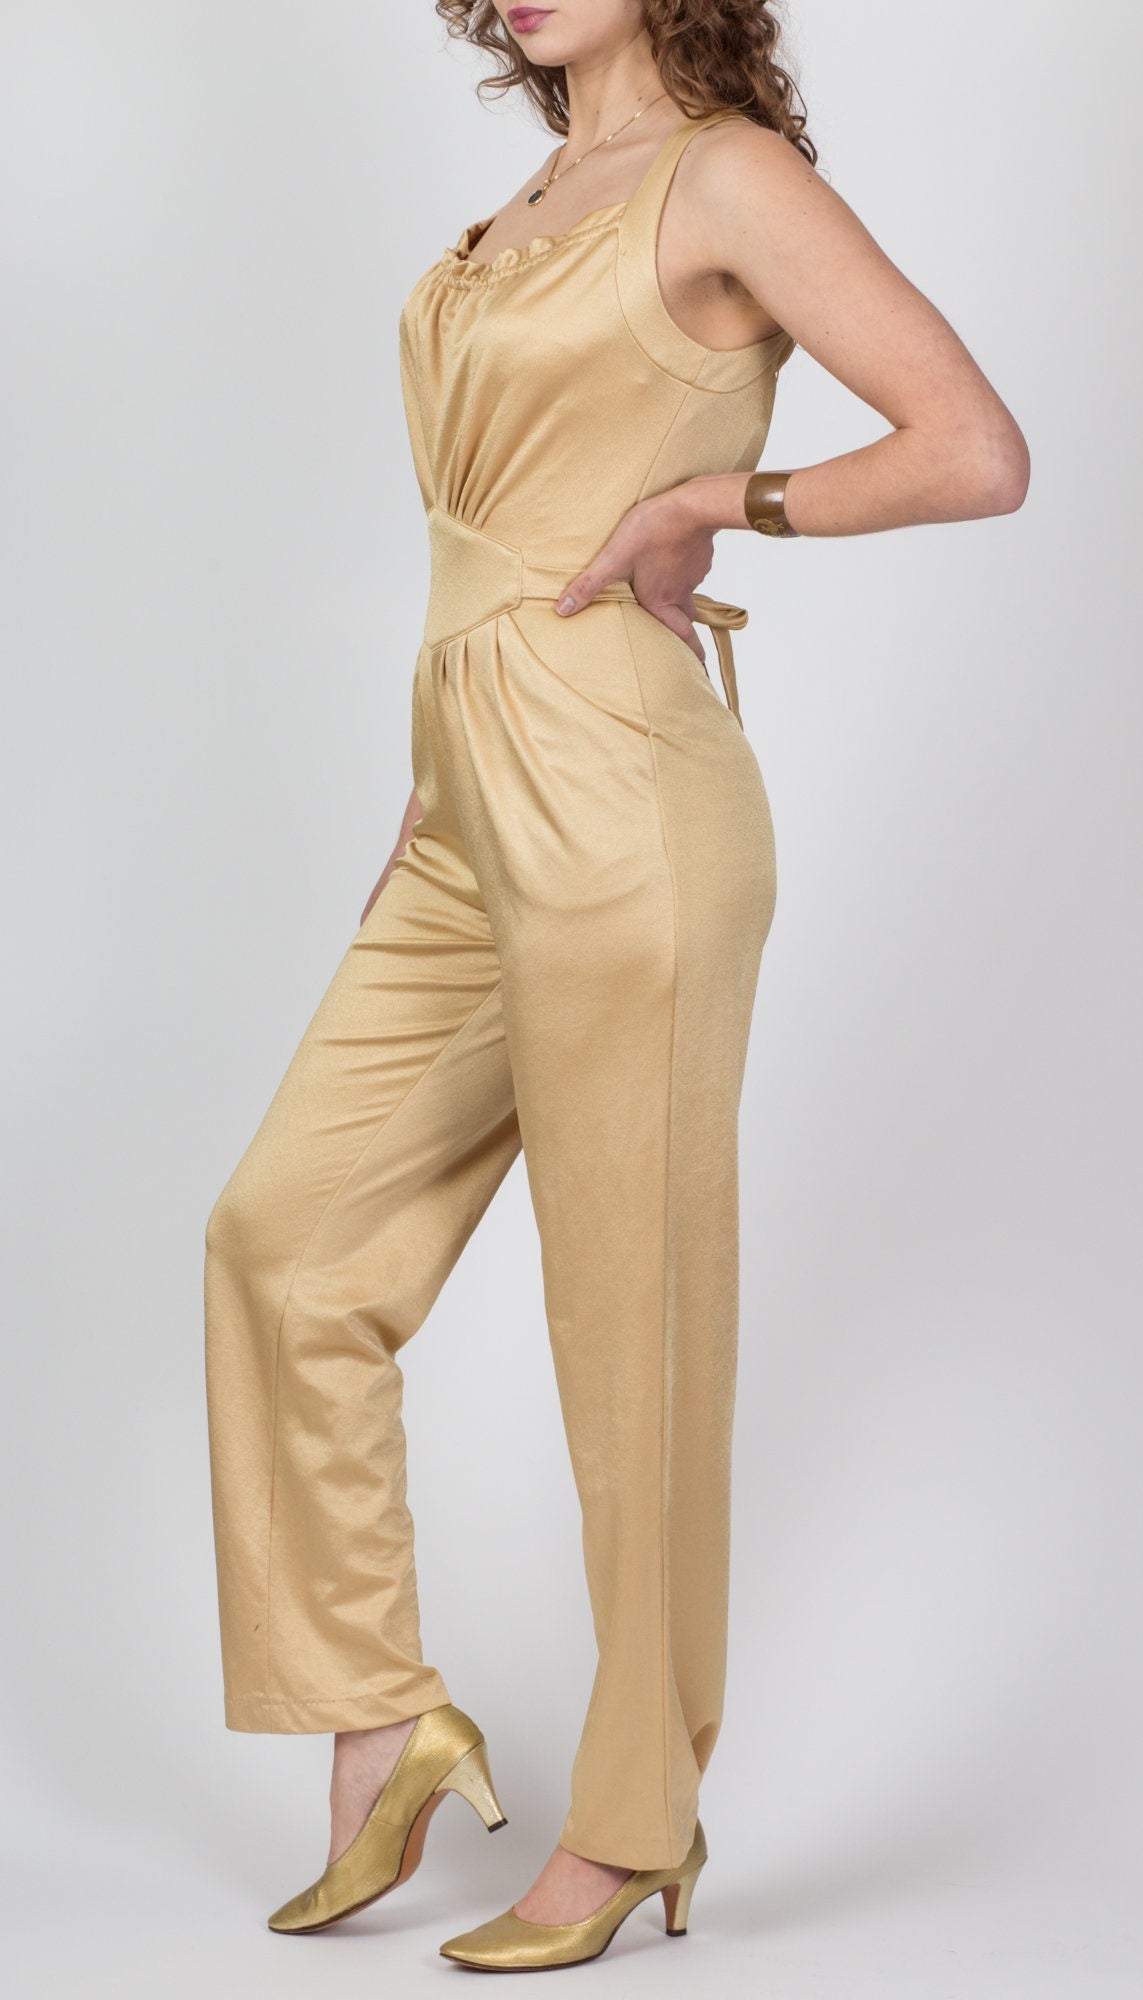 70s Liquid Gold Frederick's Of Hollywood Jumpsuit - Small to Medium 